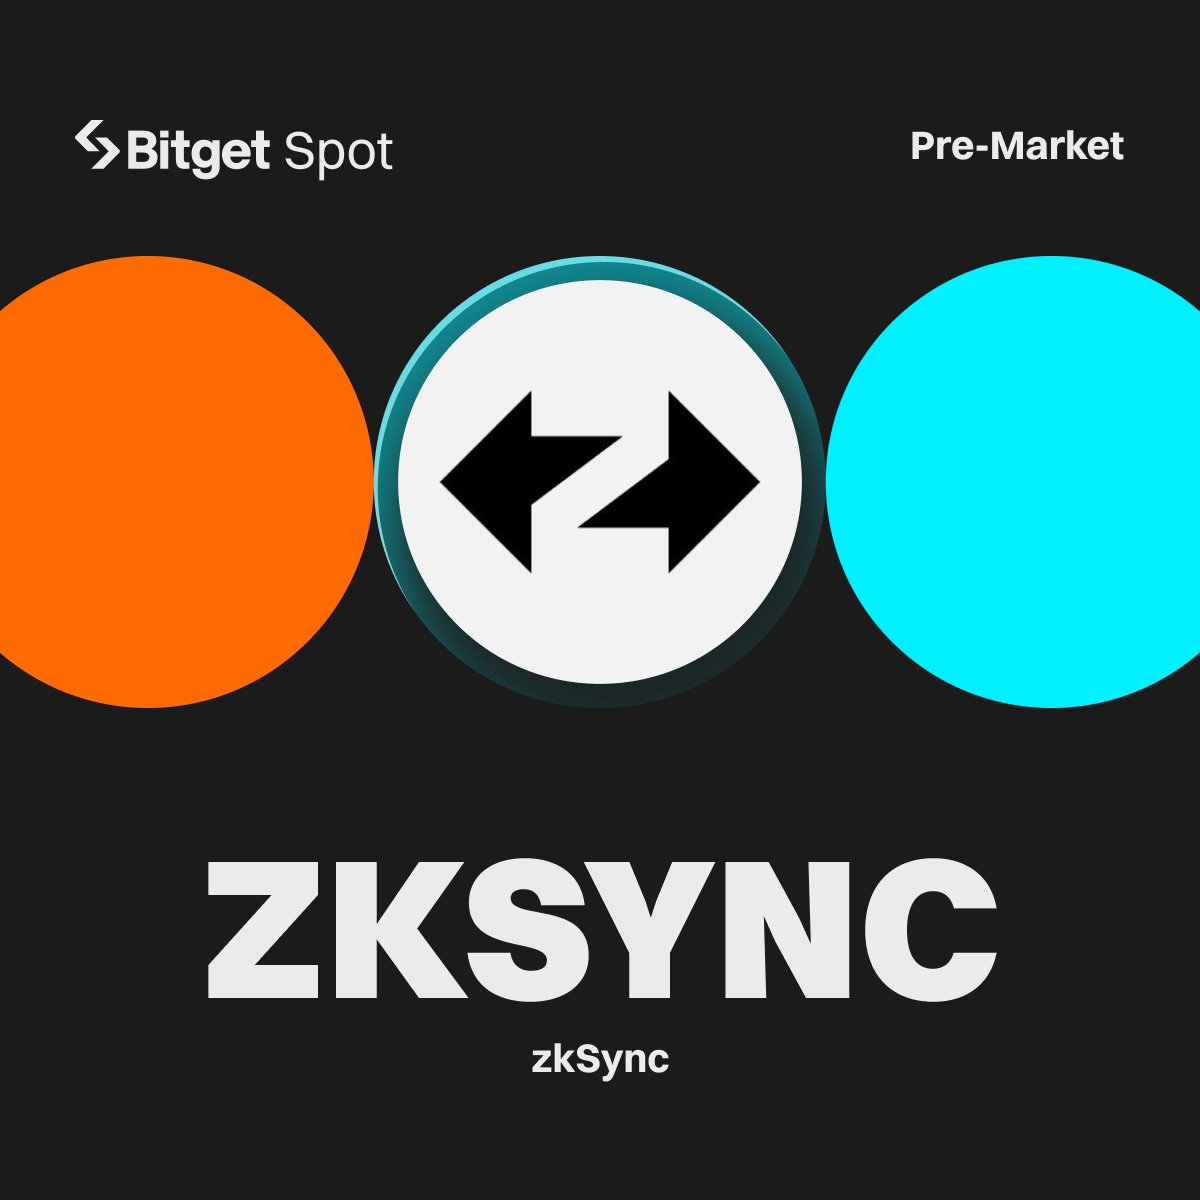 Pre-Market Listing: $ZKSYNC @zksync #Bitget will launch $ZKSYNC pre-market trading on ⏰ May 22, 9 AM (UTC). Trade $ZKSYNC before it becomes available for spot trading! More details: bitget.com/support/articl…